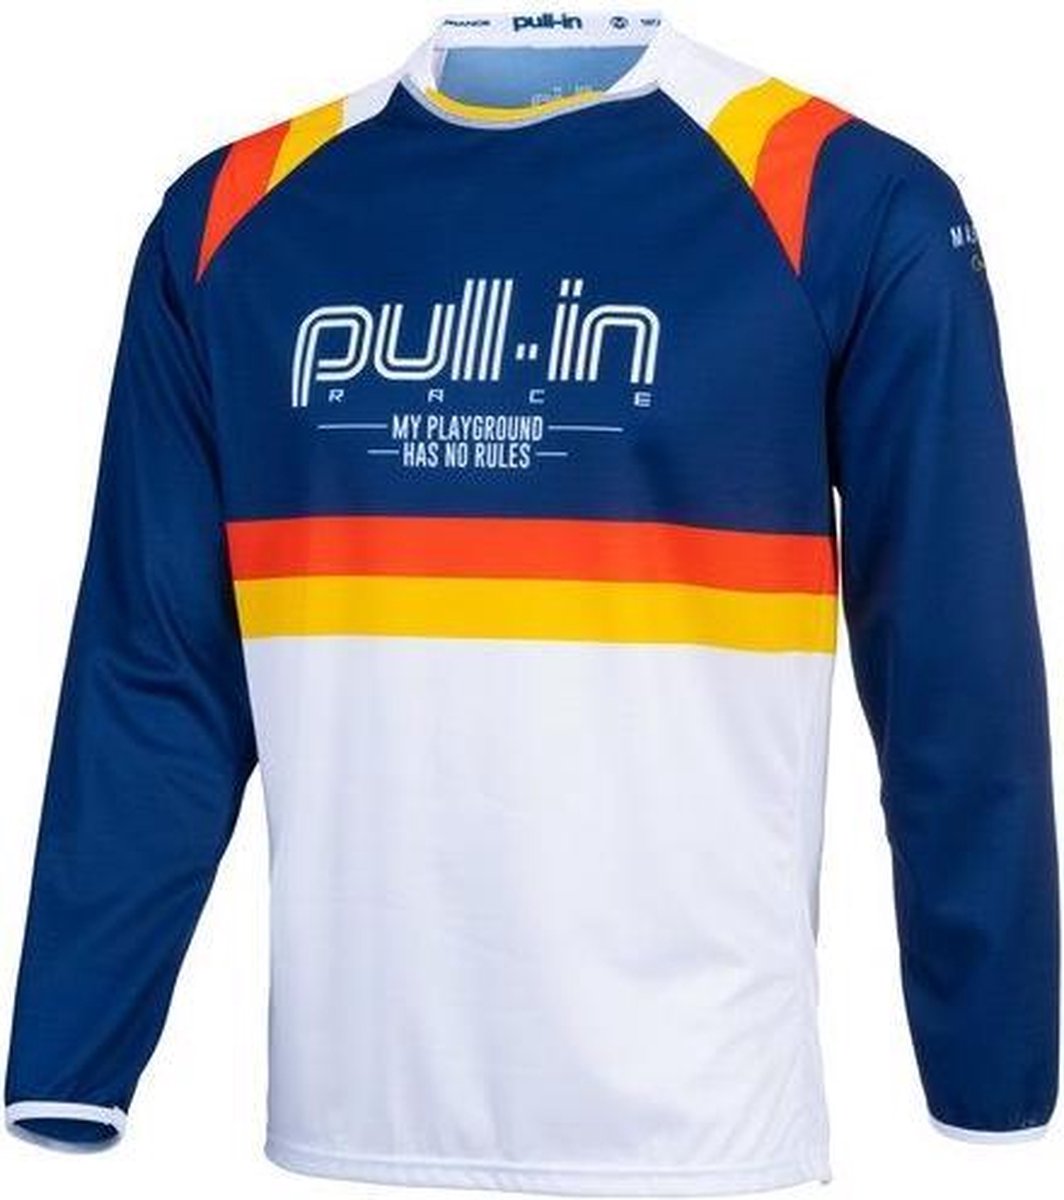 PULL-IN CHALLENGER MASTER ADULT JERSEY BLUE V2 | BLAUW / WIT | MAAT S